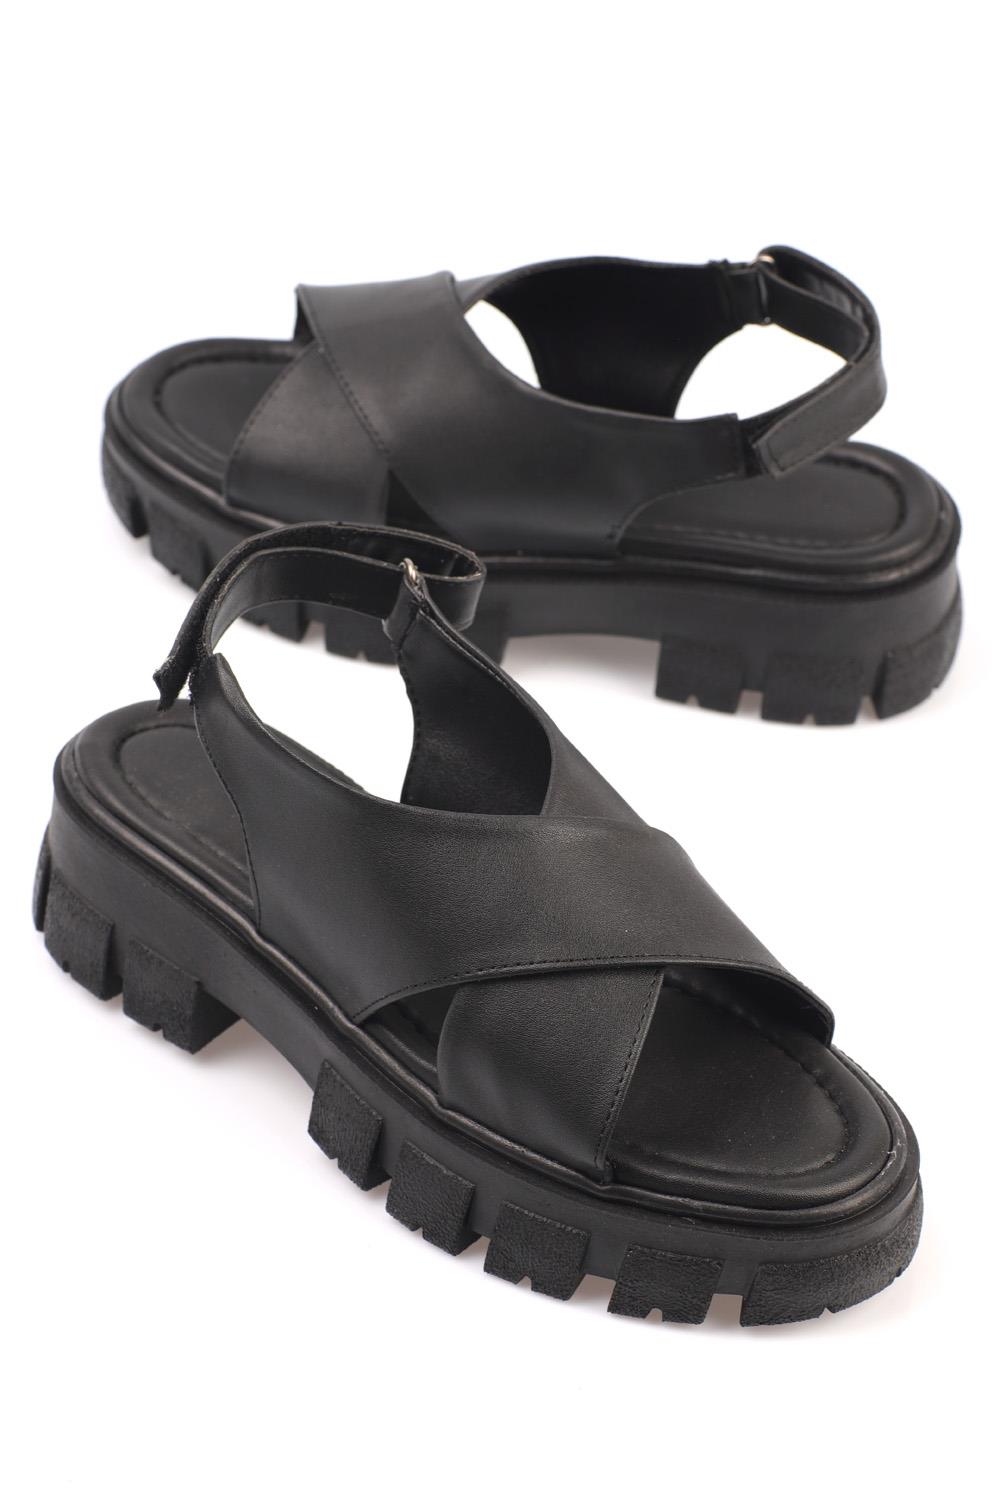 Capone Thick-Sole Cross-Band Women Black Sandals